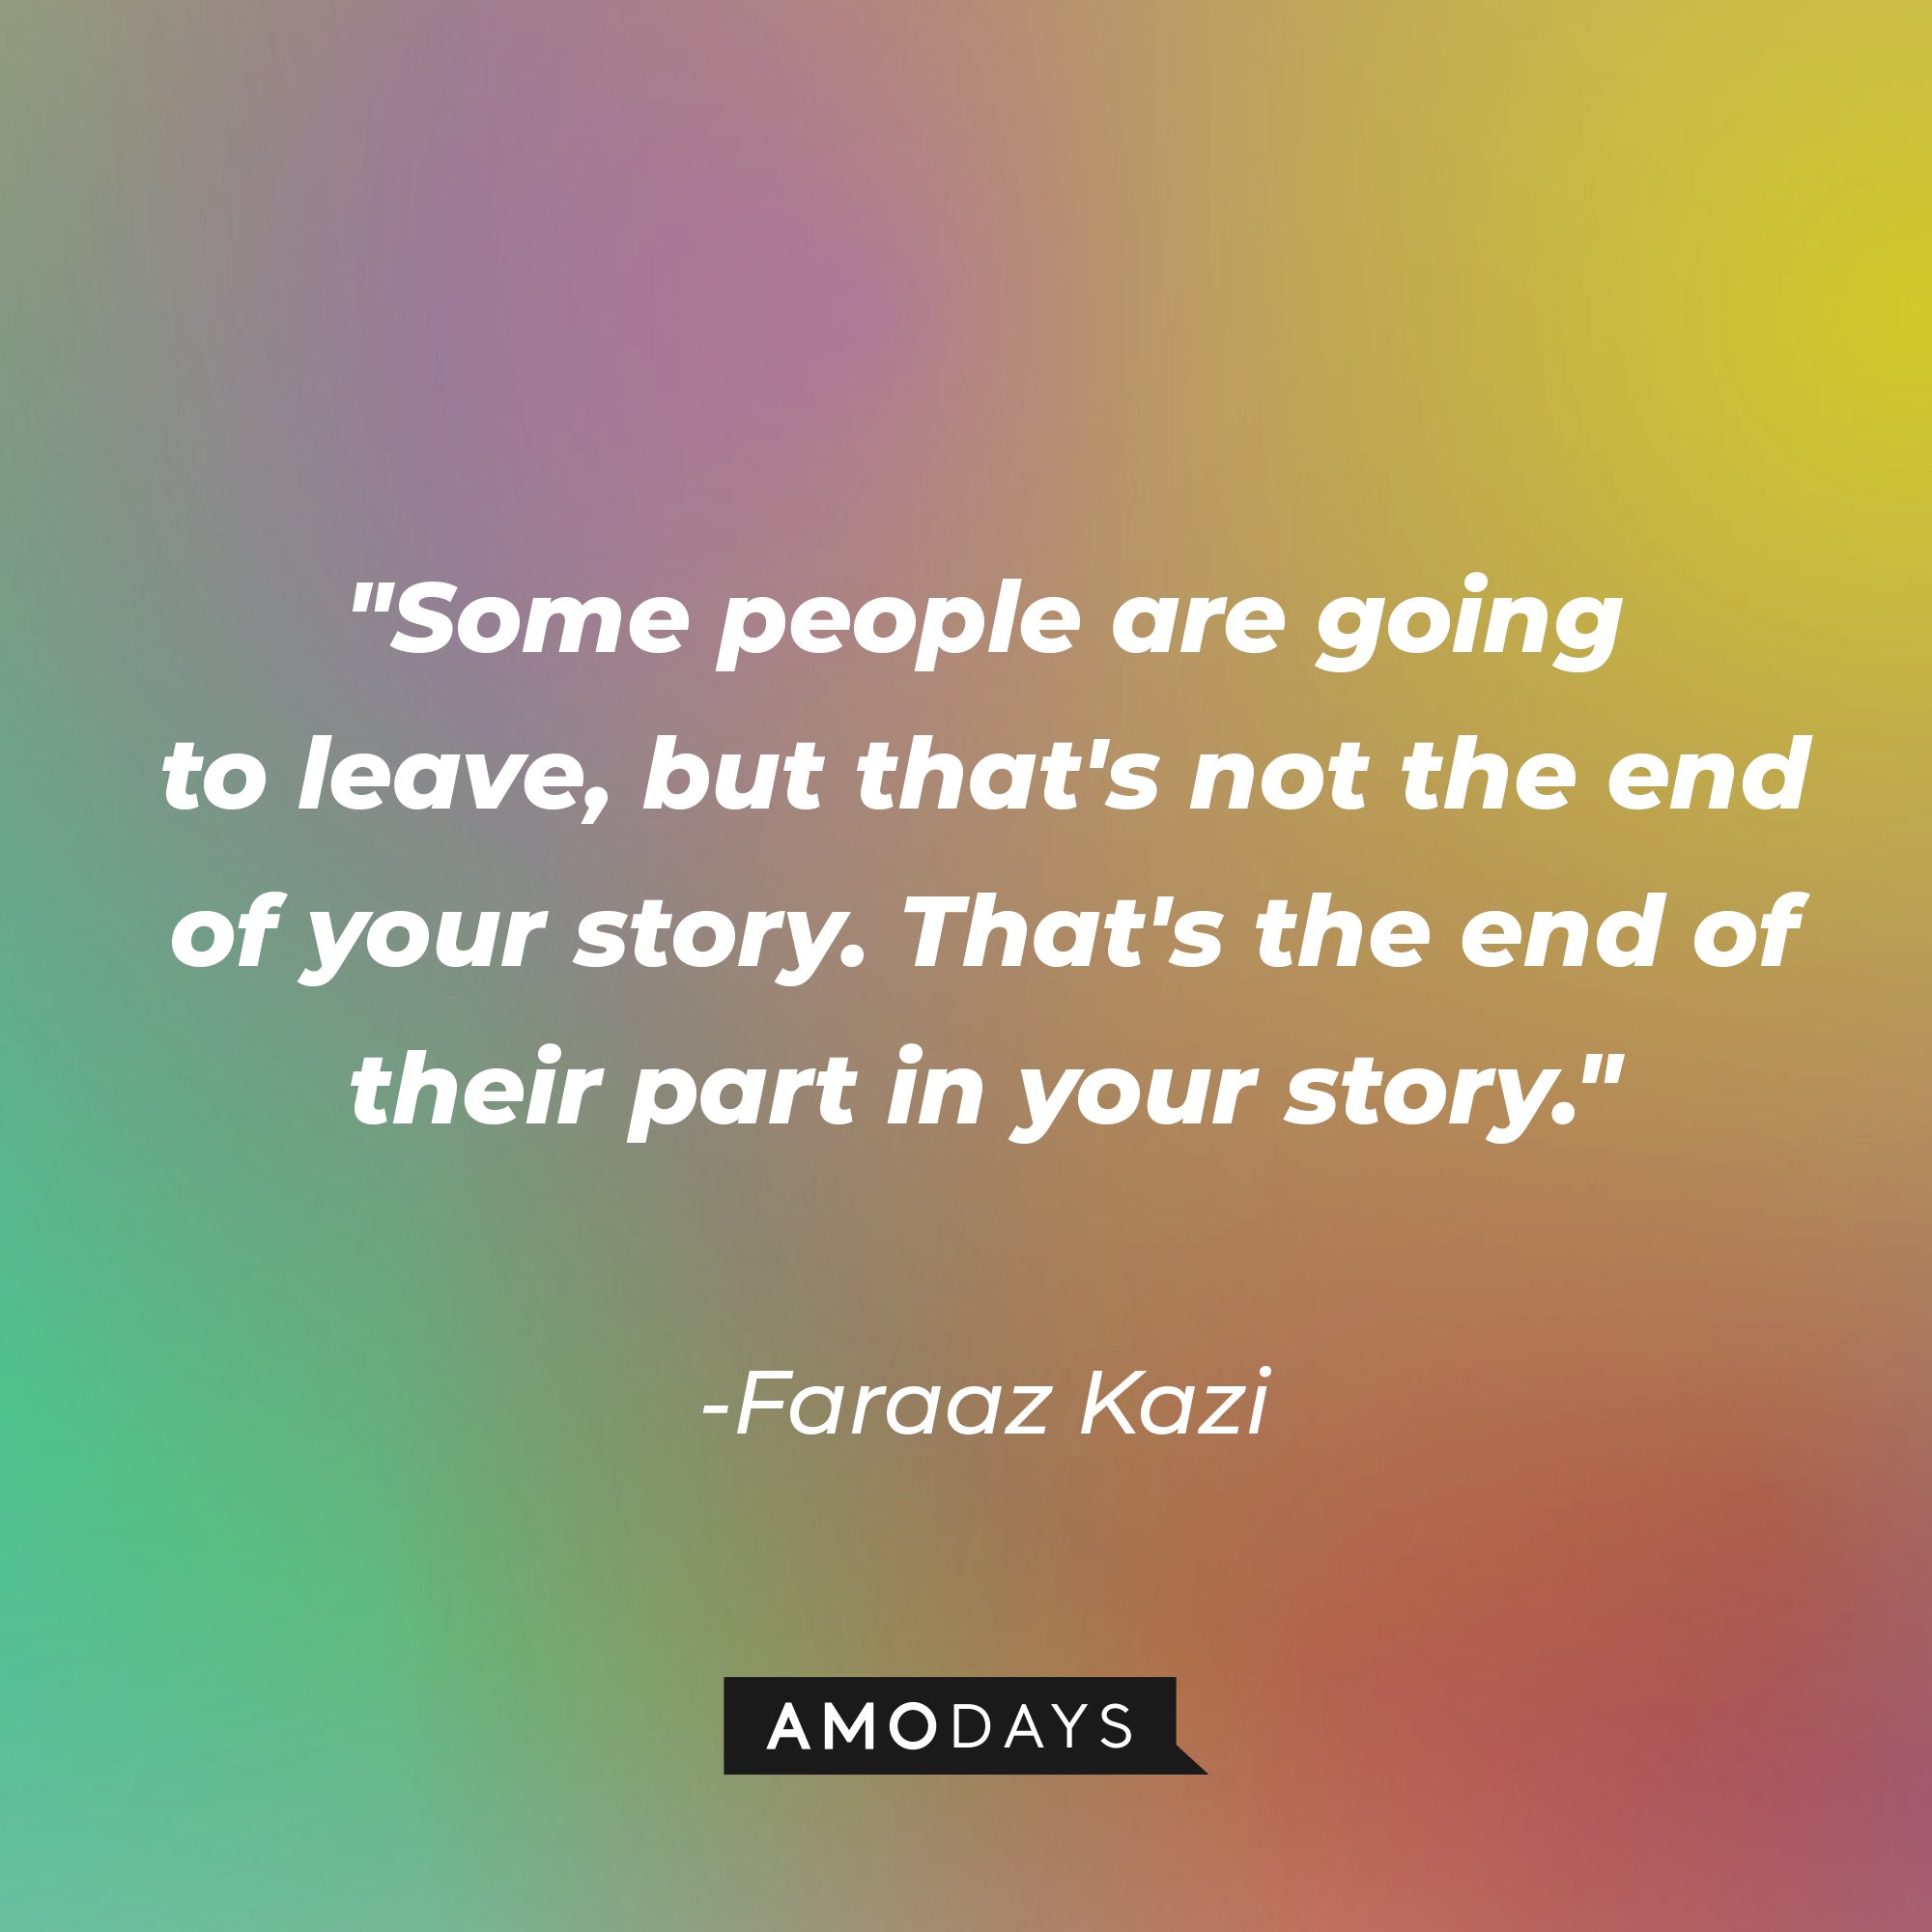 Faraaz Kazi's quote: "Some people are going to leave, but that's not the end of your story. That's the end of their part in your story." | Image: AmoDays